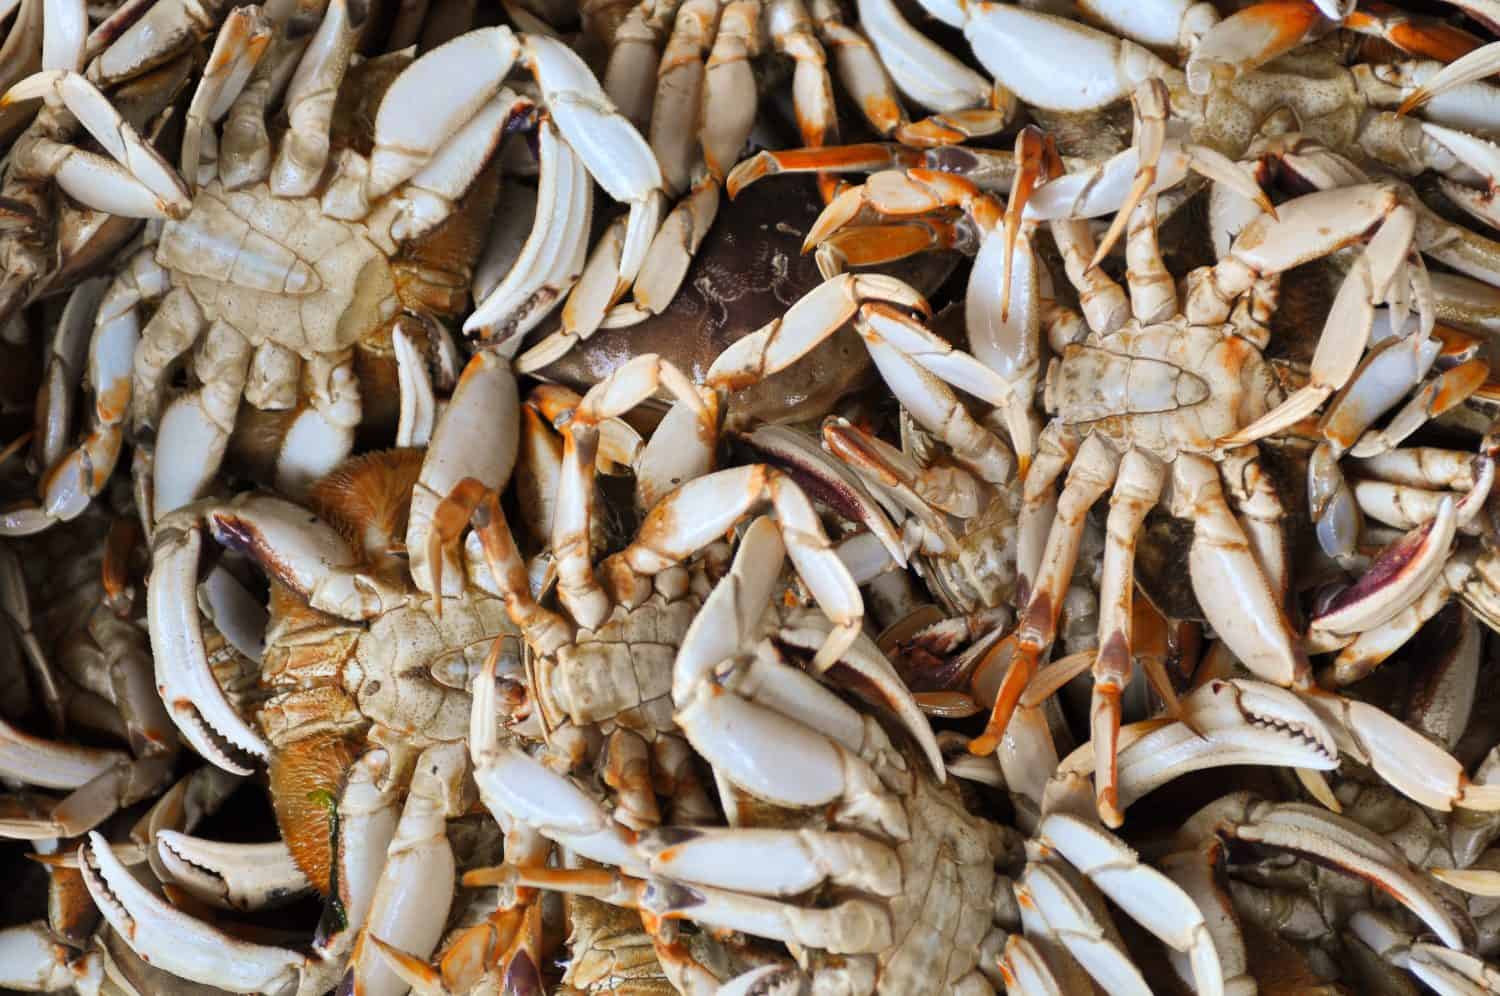 Close-up of a stack of freshly caught Dungeness crab. From the Oregon coast.